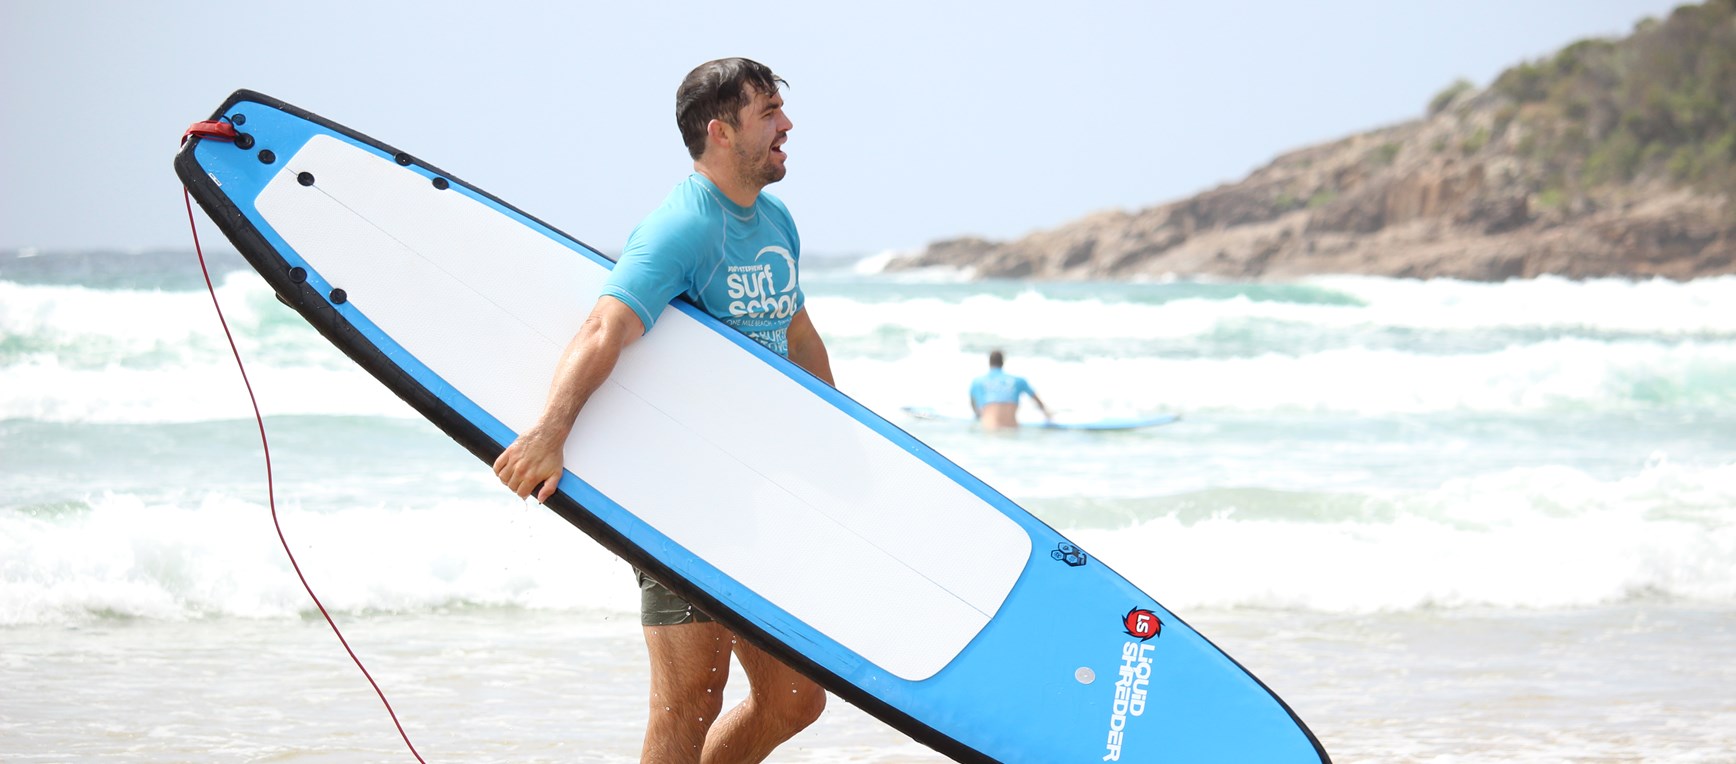 Gallery: Surfing lessons at One Mile Beach